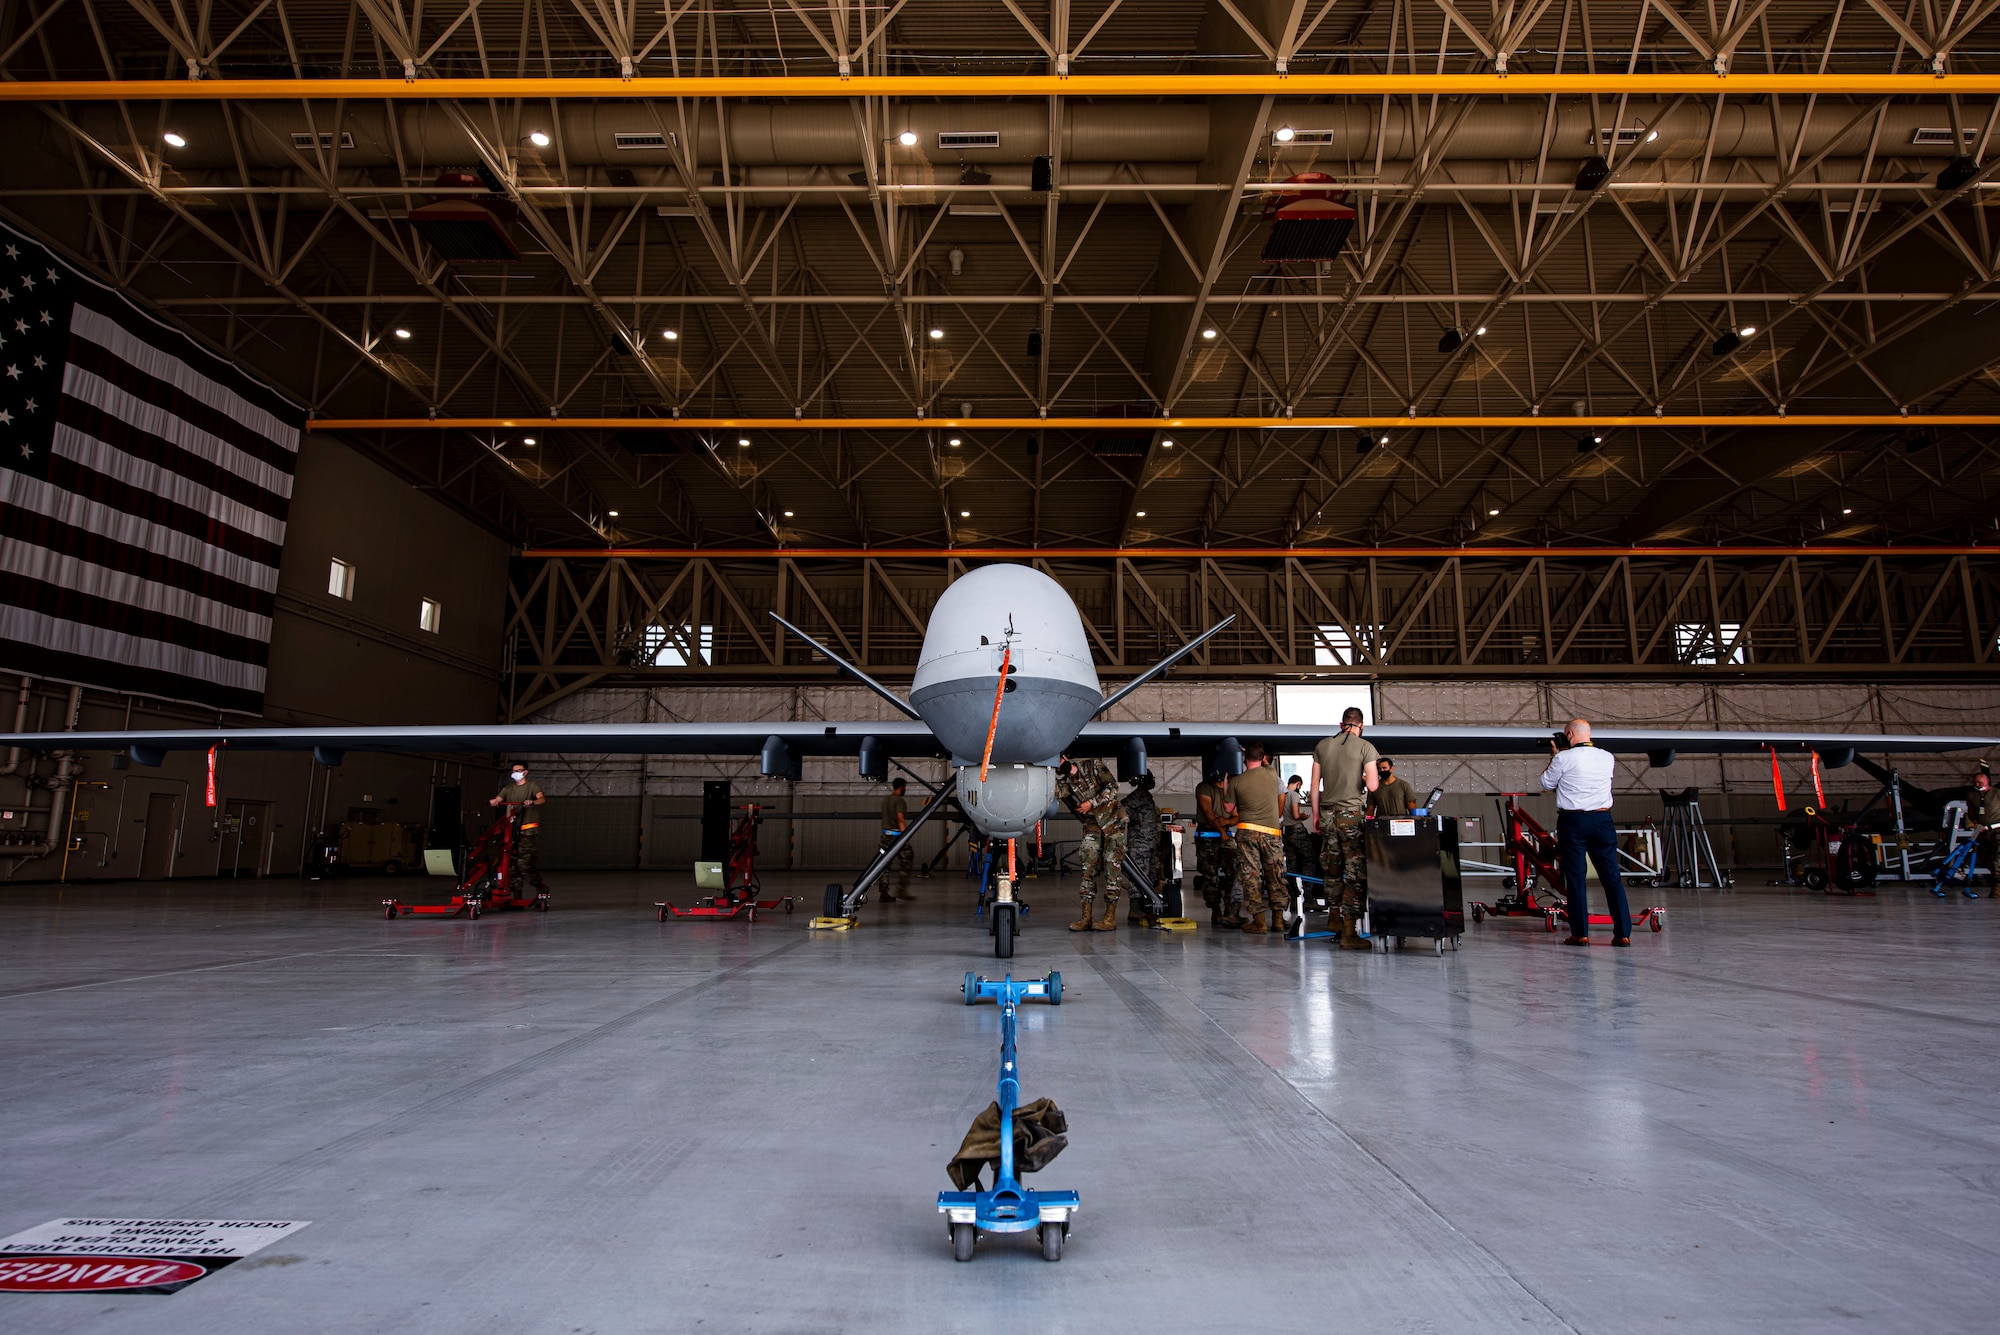 MQ-9 Reaper sits in a hangar with 8 members preparing for routine maintenance.